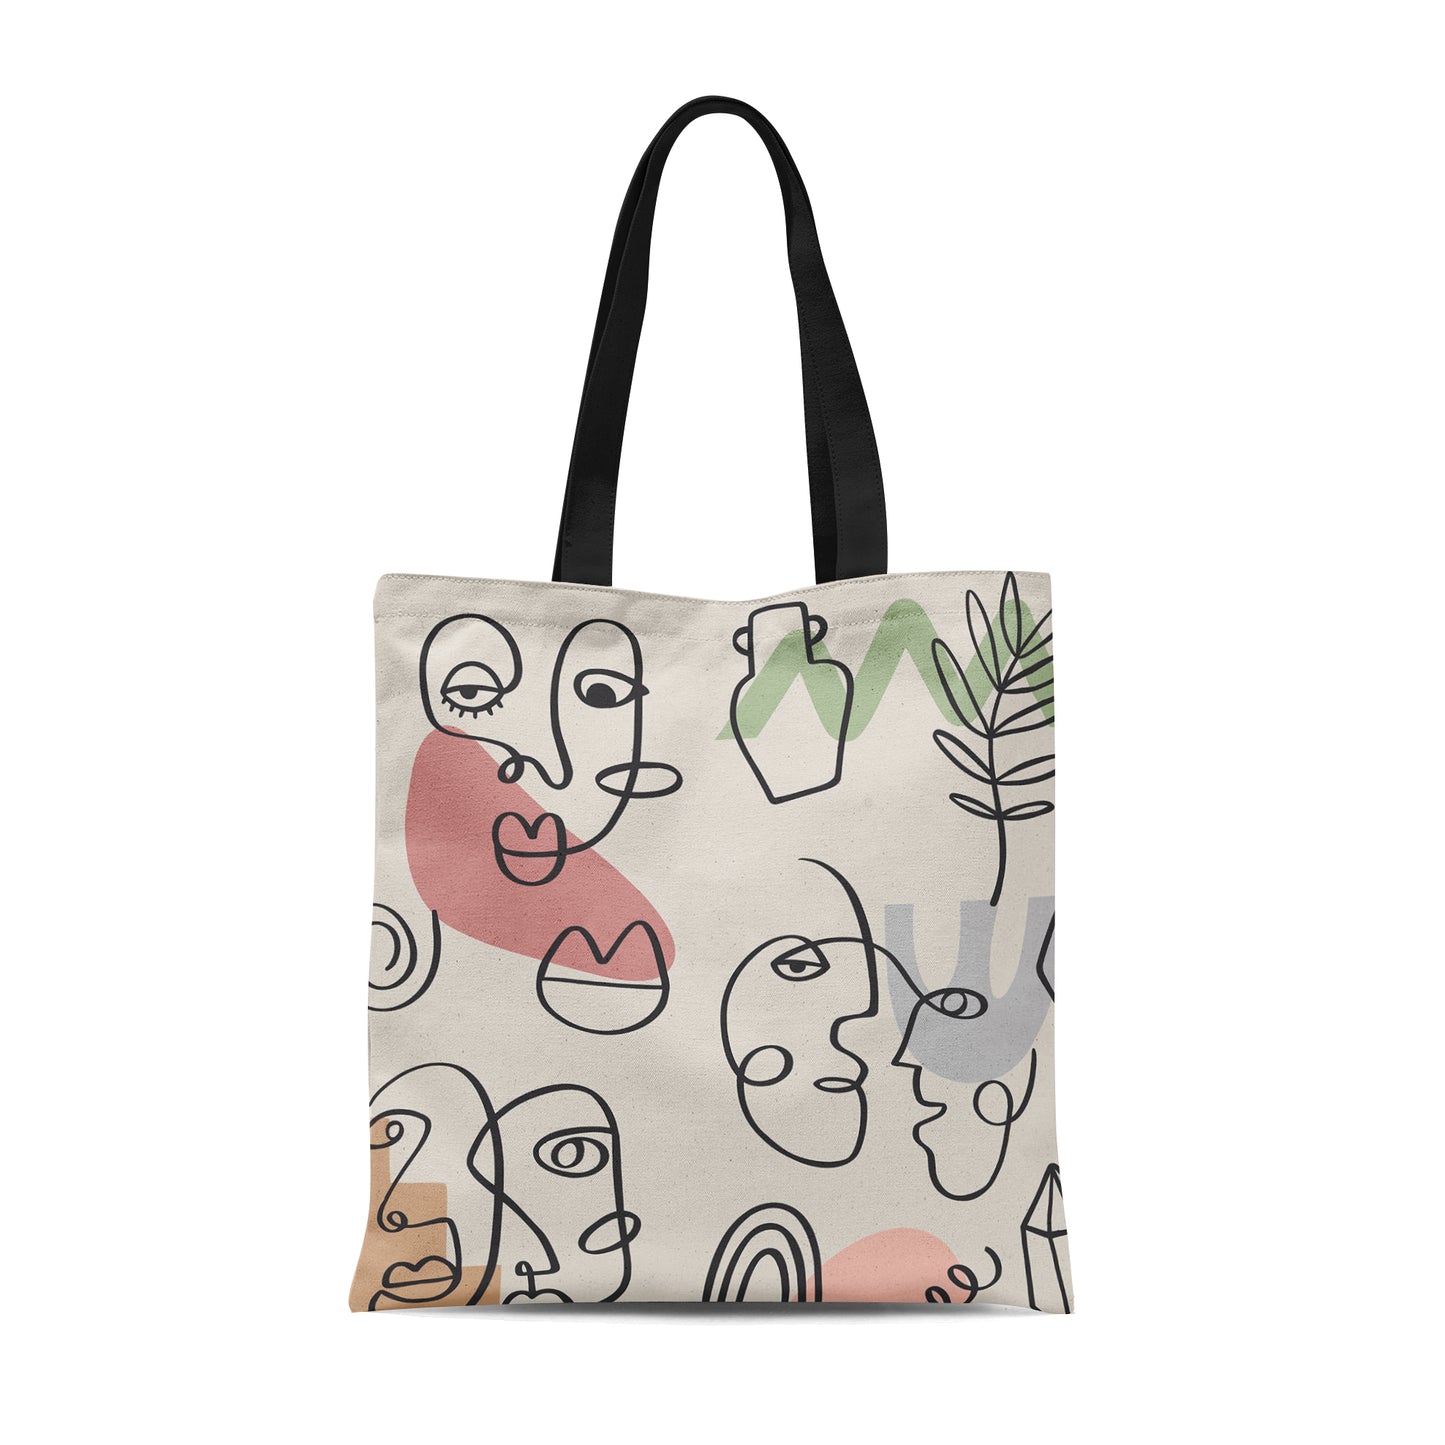 Soft Shapes and Faces Tote Bag